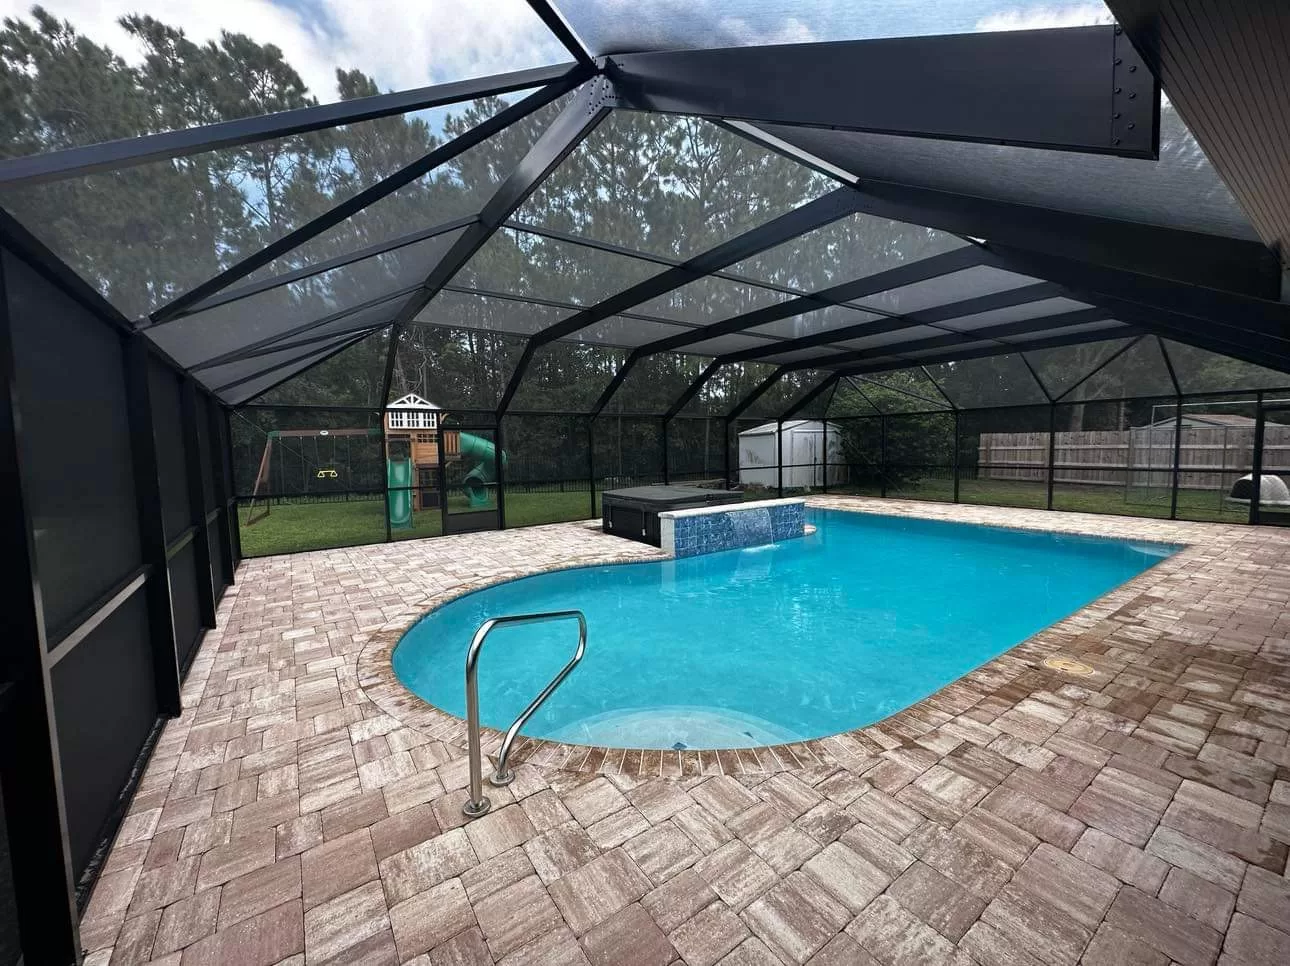 A beautiful pool cage was built for this client right in their backyard in Jacksonville, FL.